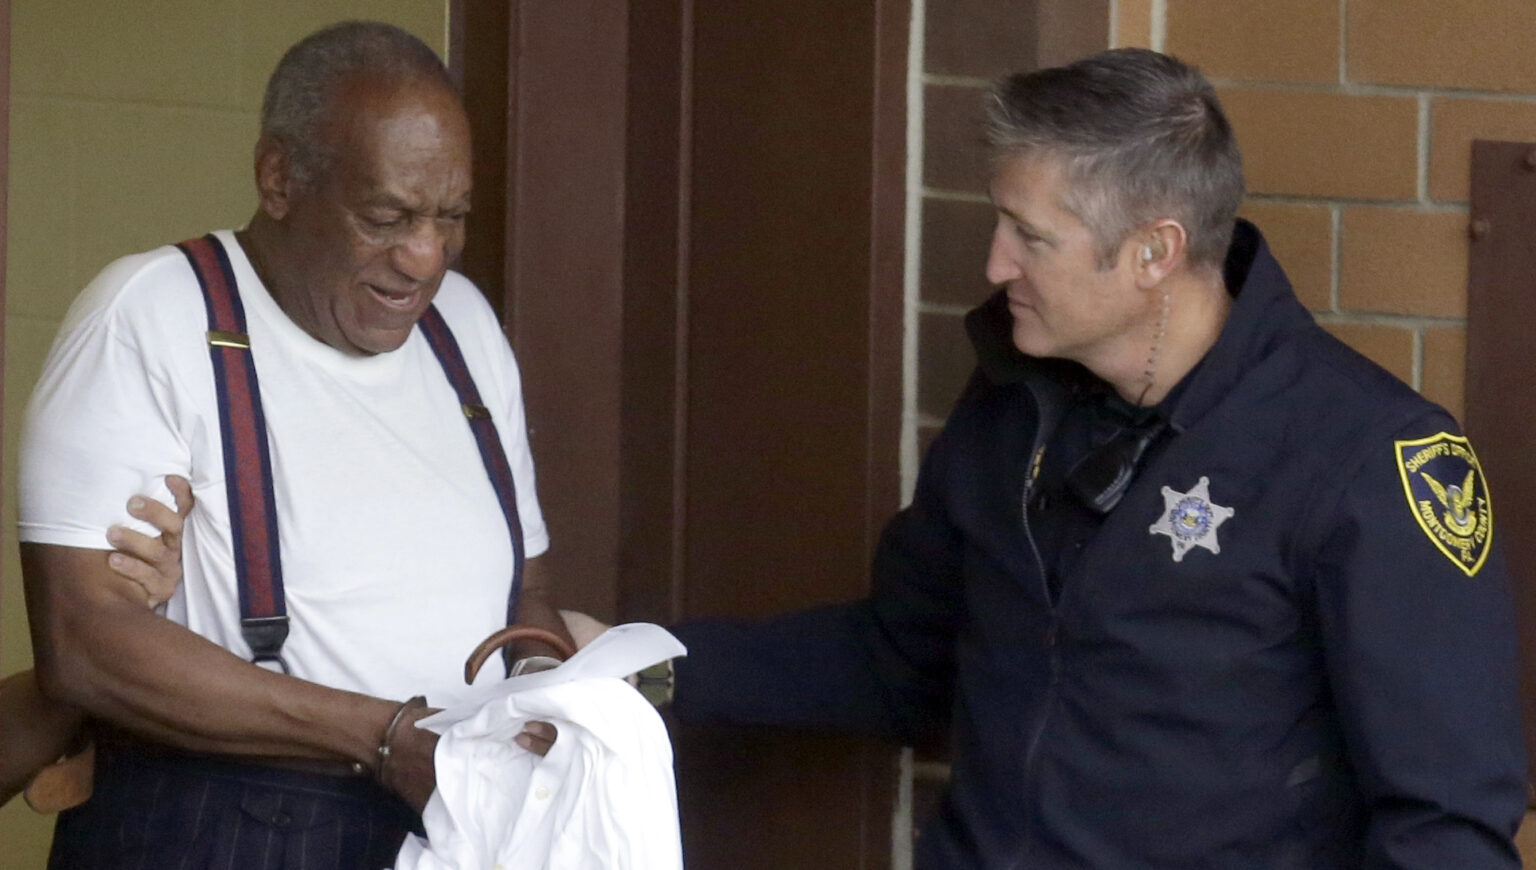 America's legal system shows its holes once more, as actor and comedian Bill Cosby is set to be released from prison. Why "America's dad" isn't so rad.